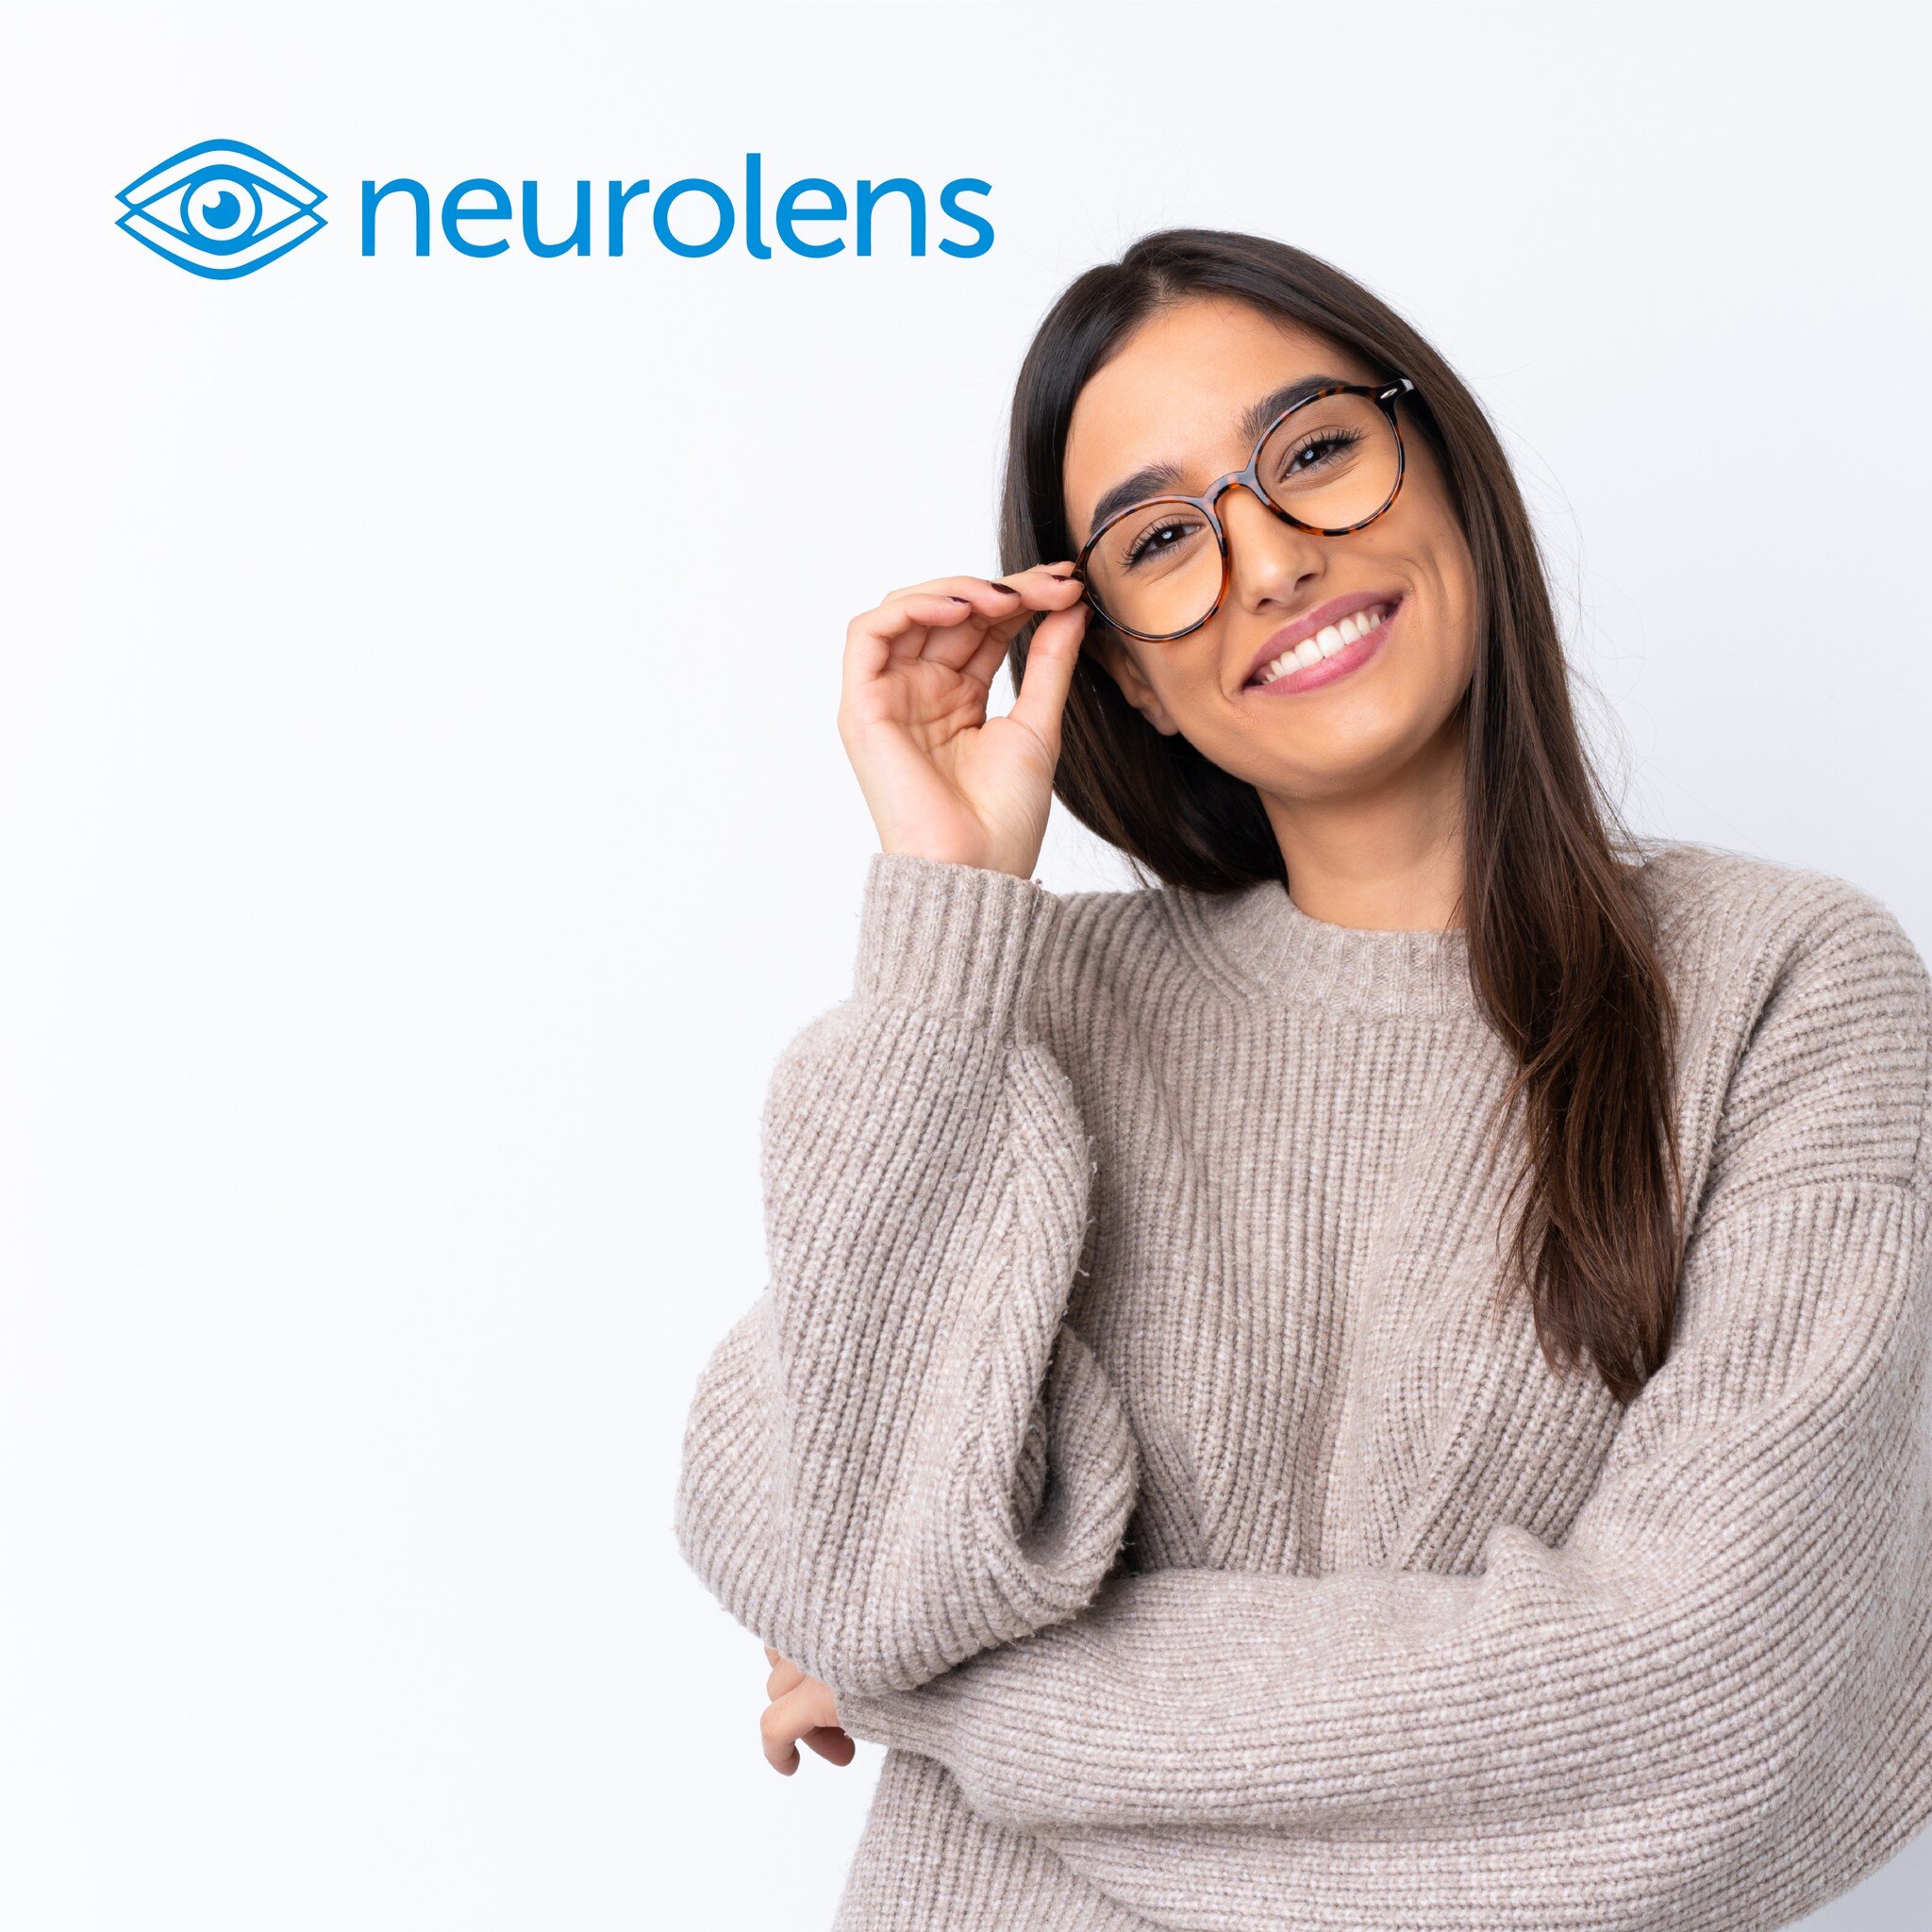 Get ready to say goodbye to those pesky headaches, eye strain, and neck pain. We're offering an exclusive deal this March: $200 off Neurolens! Neurolens is the first and only contoured prism lens shown to relieve the painful symptoms. Take the first 